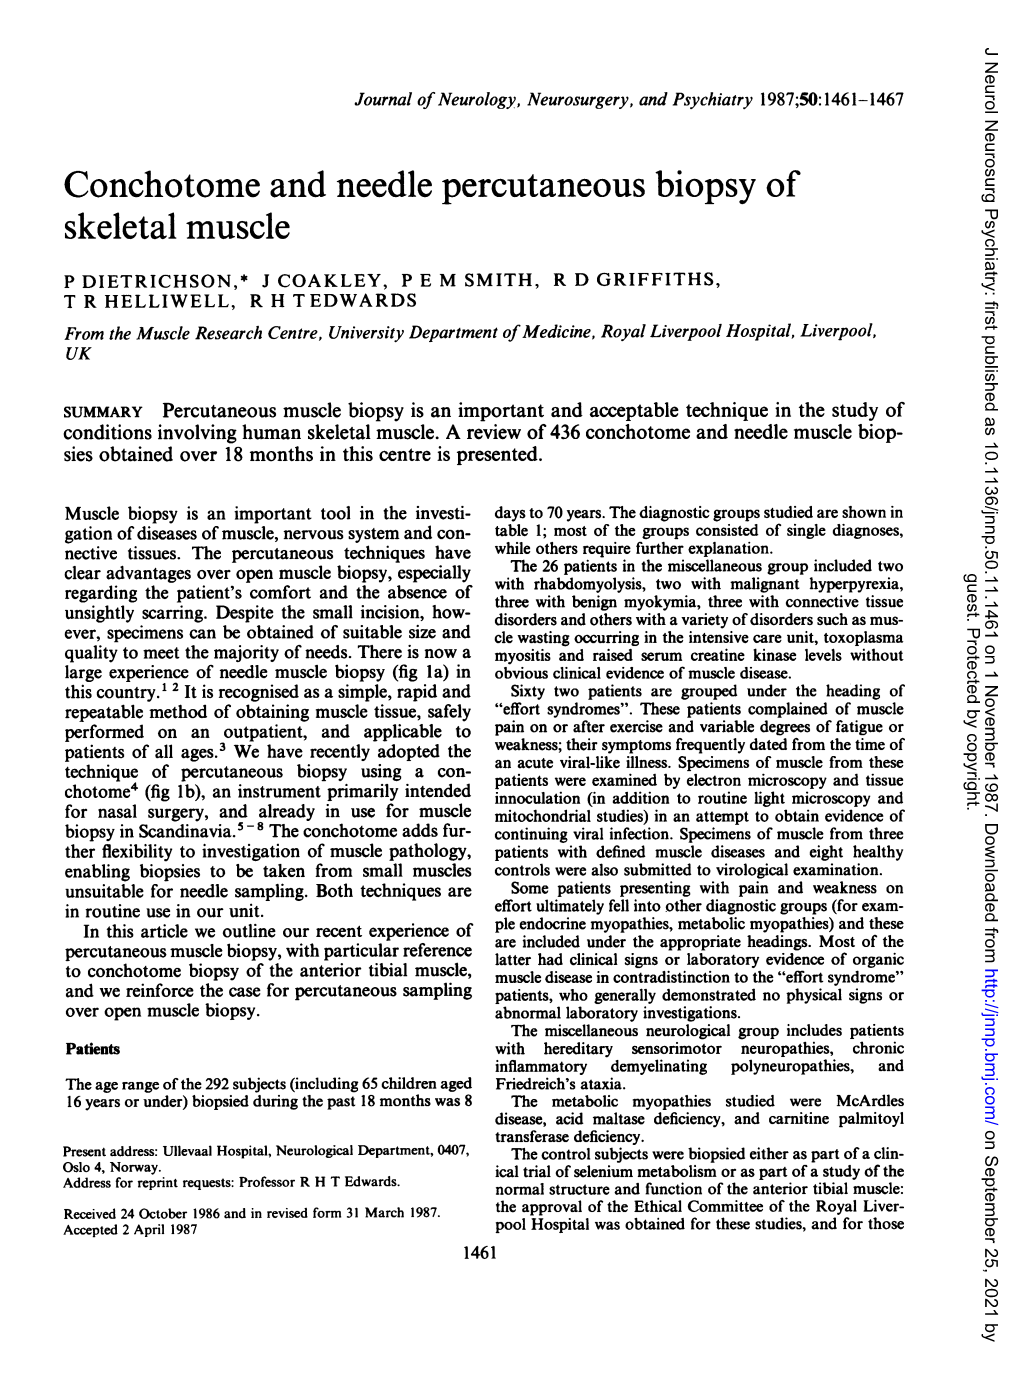 Conchotome and Needle Percutaneous Biopsy of Skeletal Muscle